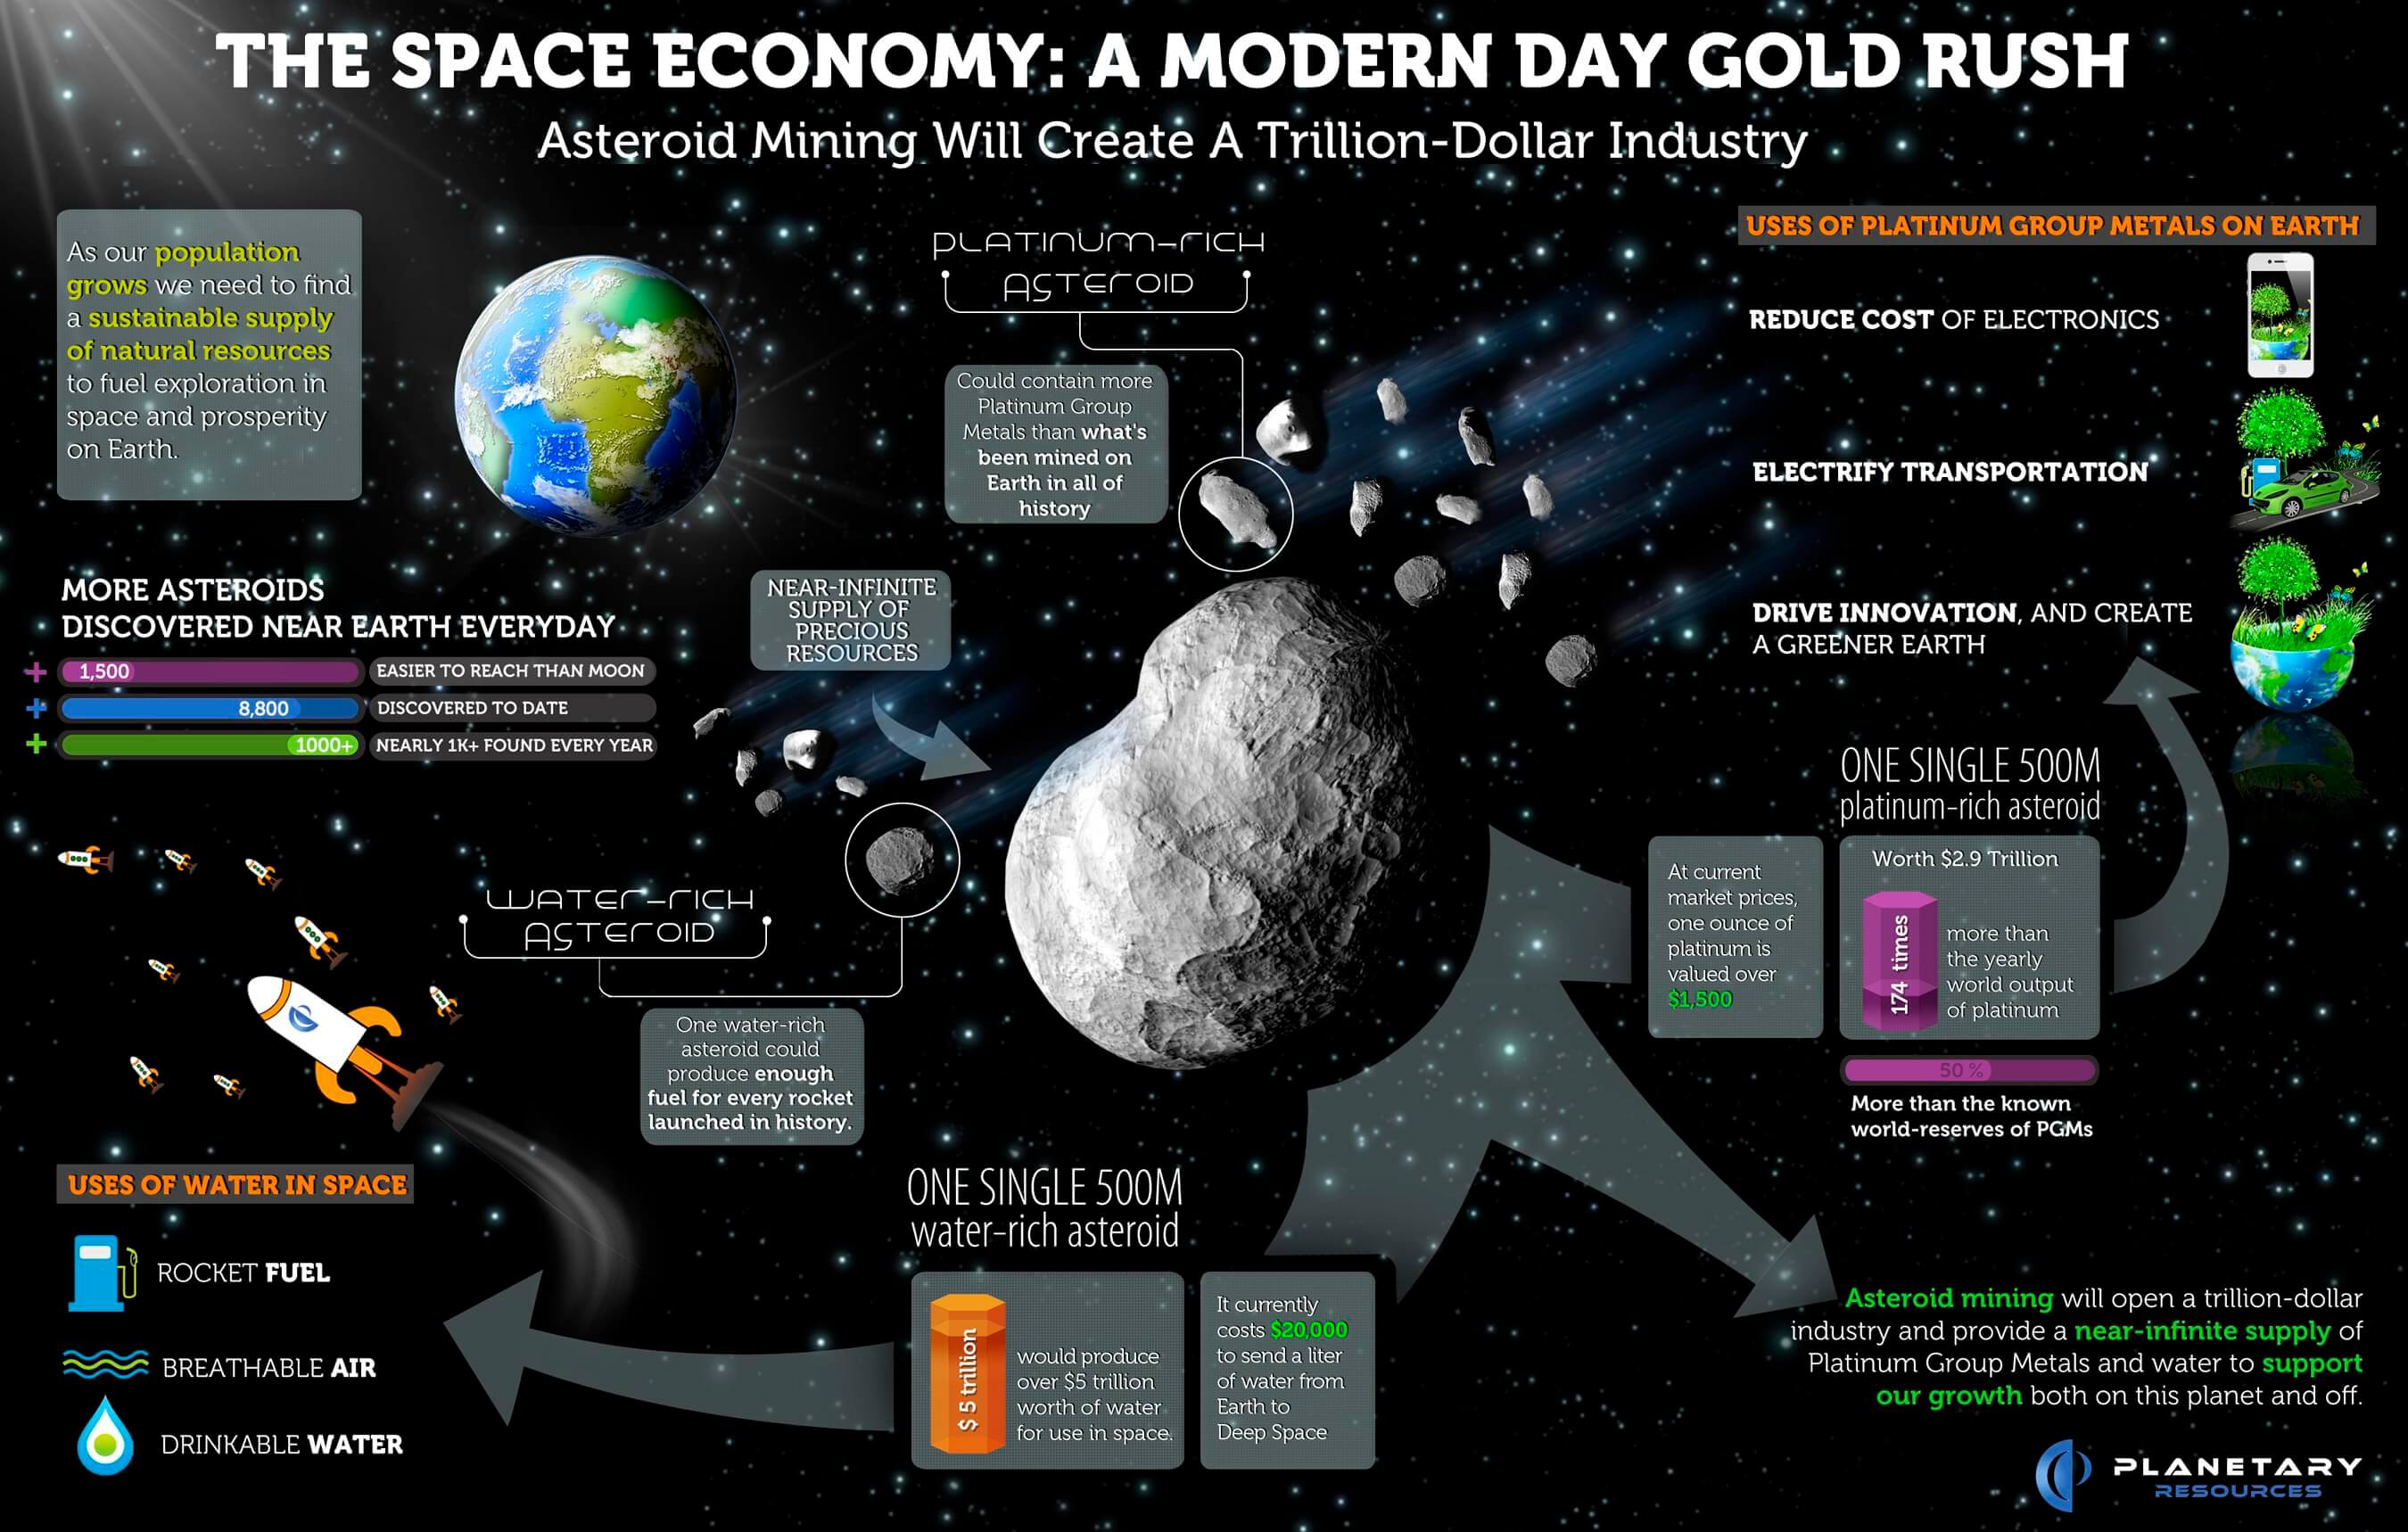 The Space Economy is a modern-day gold rush 100 times bigger than Bitcoin. Asteroid mining will create a multitrillion-dollar industry. Keynote Speaker Igor Beuker 